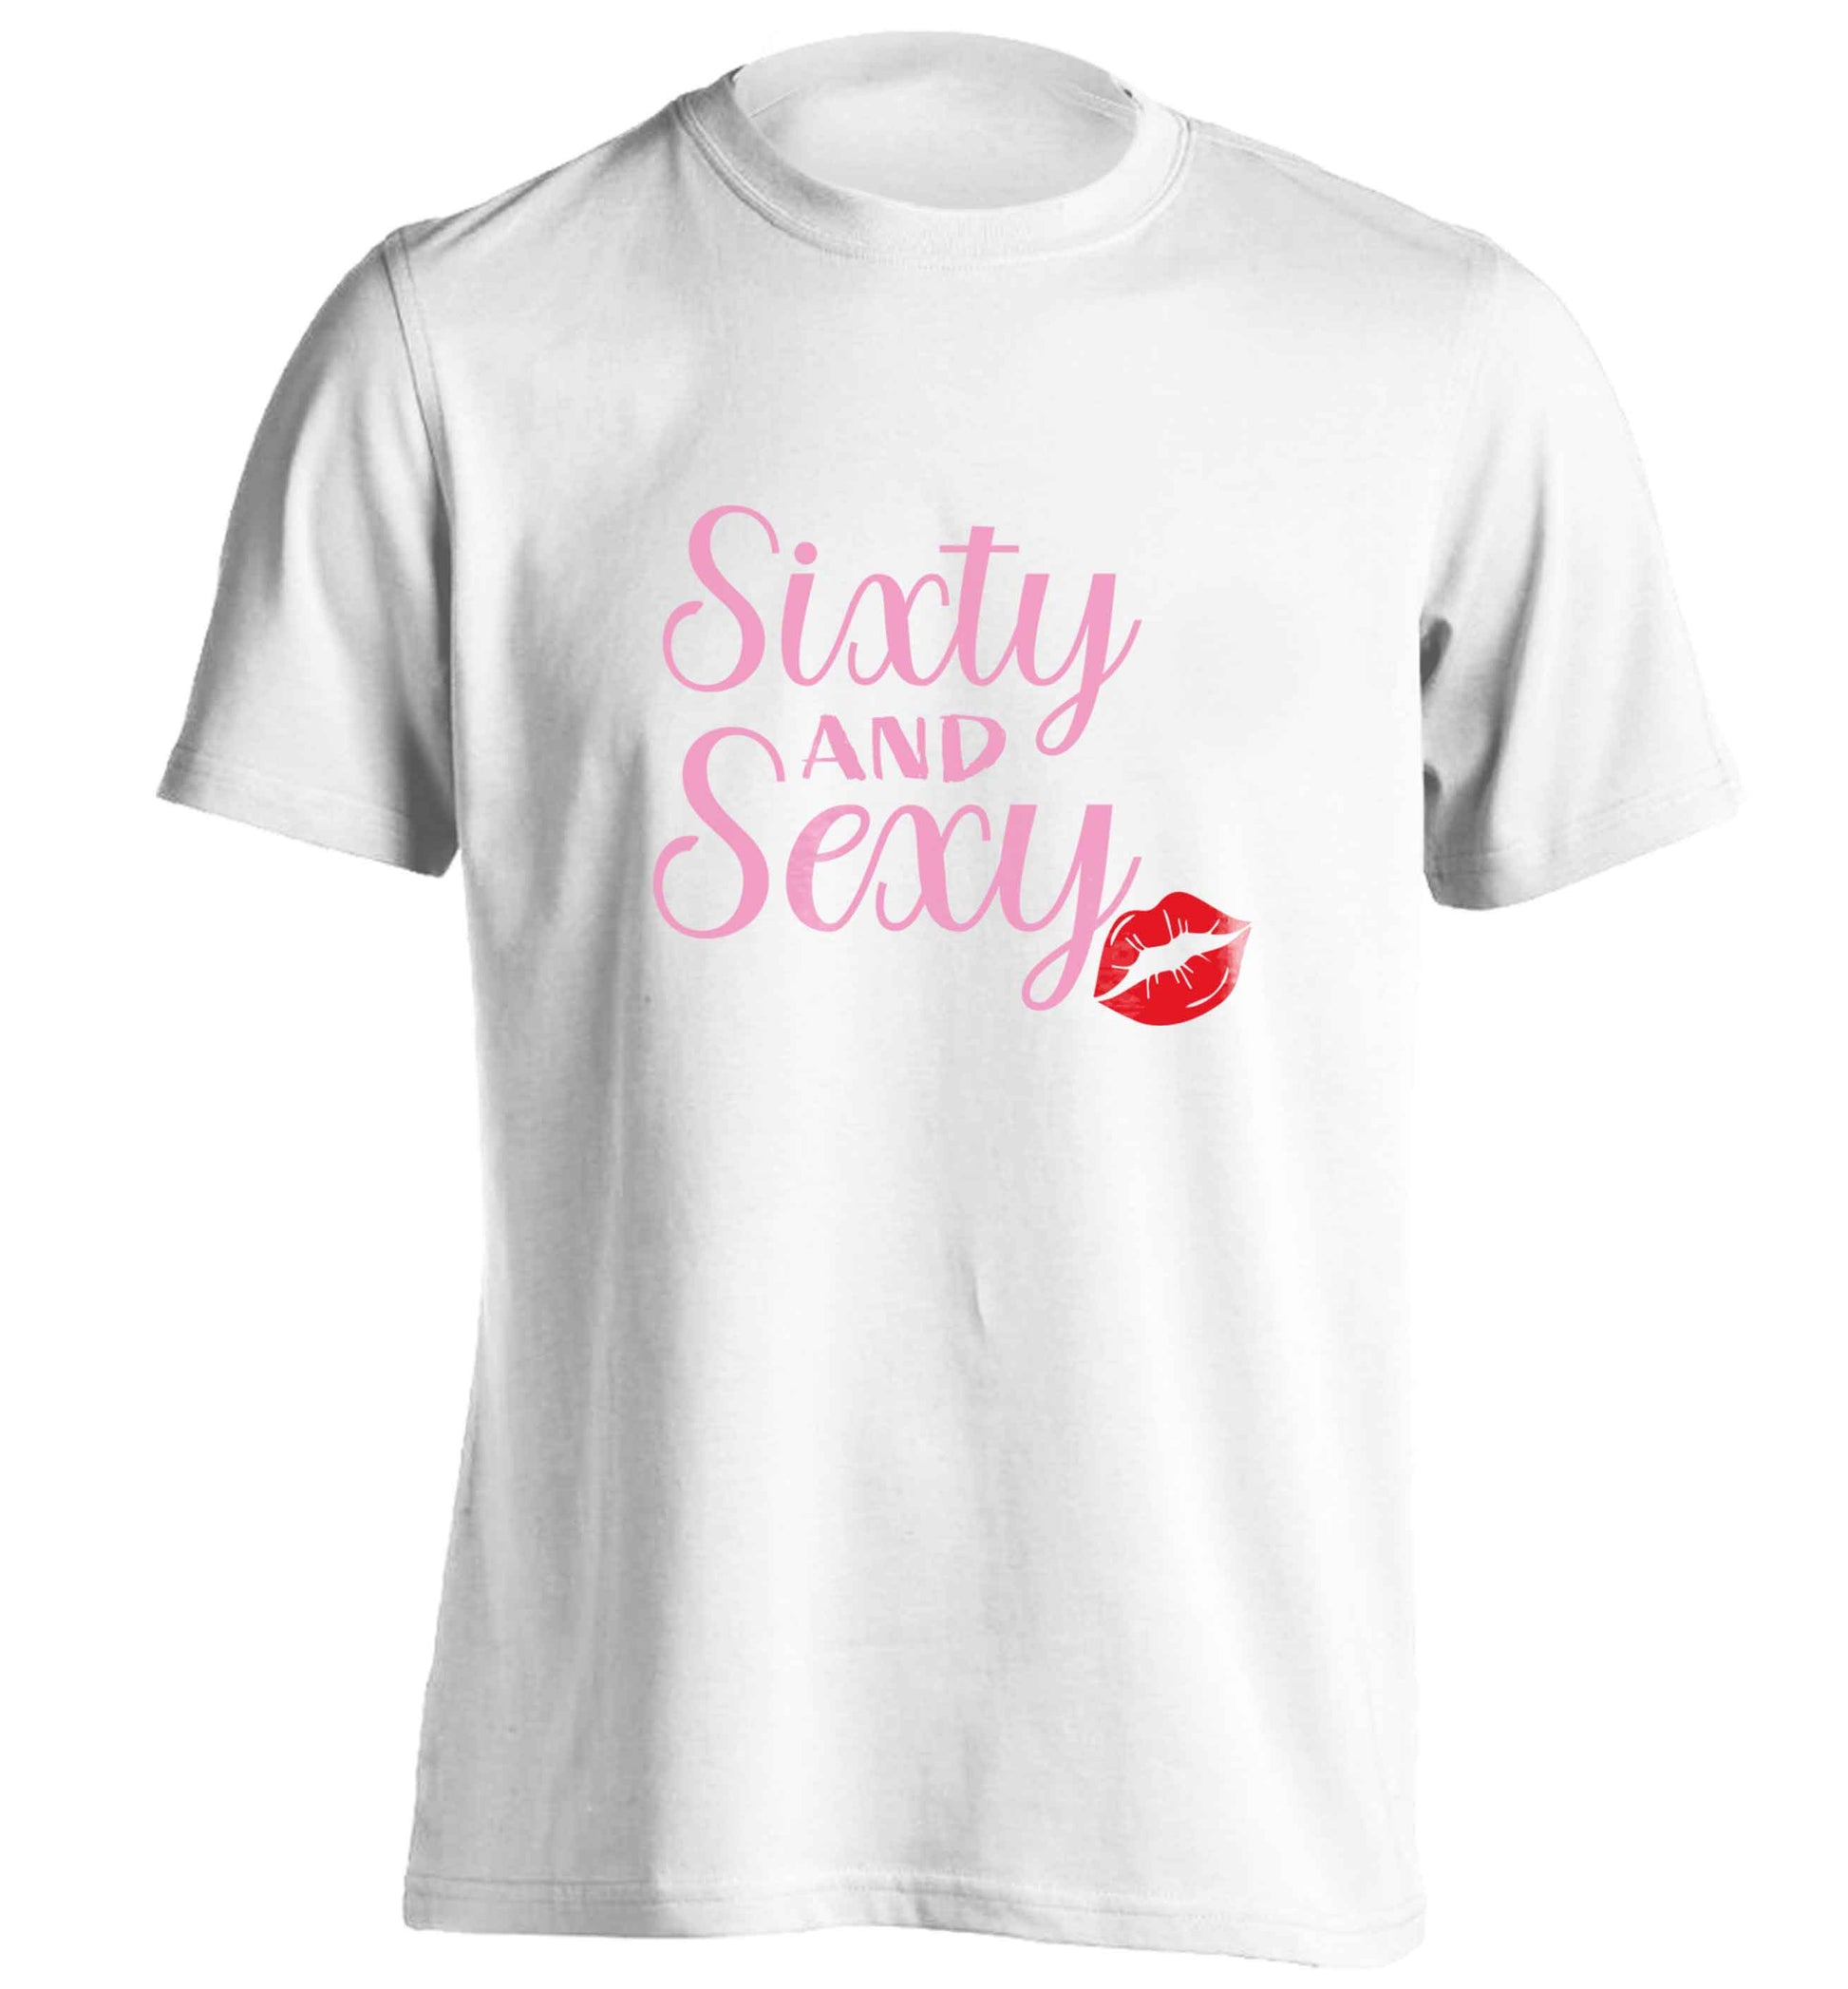 Sixty and sexy adults unisex white Tshirt 2XL